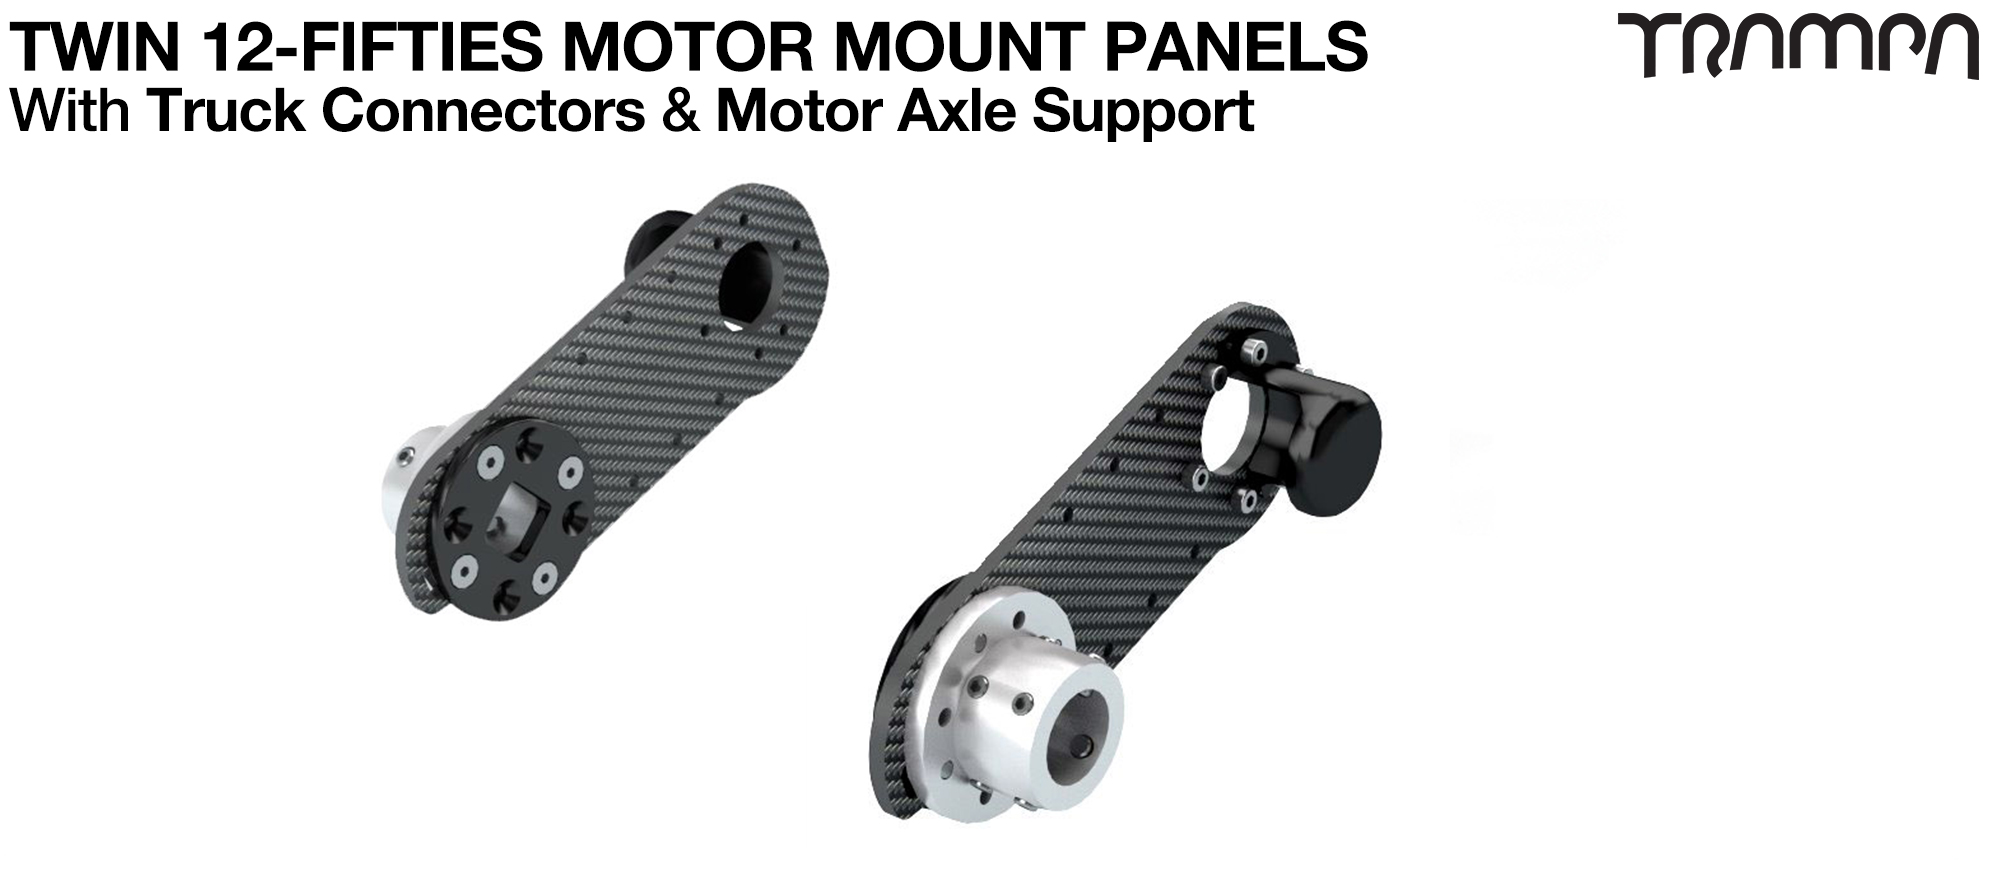 12Fifties Truck Motor Mount Connector & Carbon Panel with Motor Axle support - TWIN